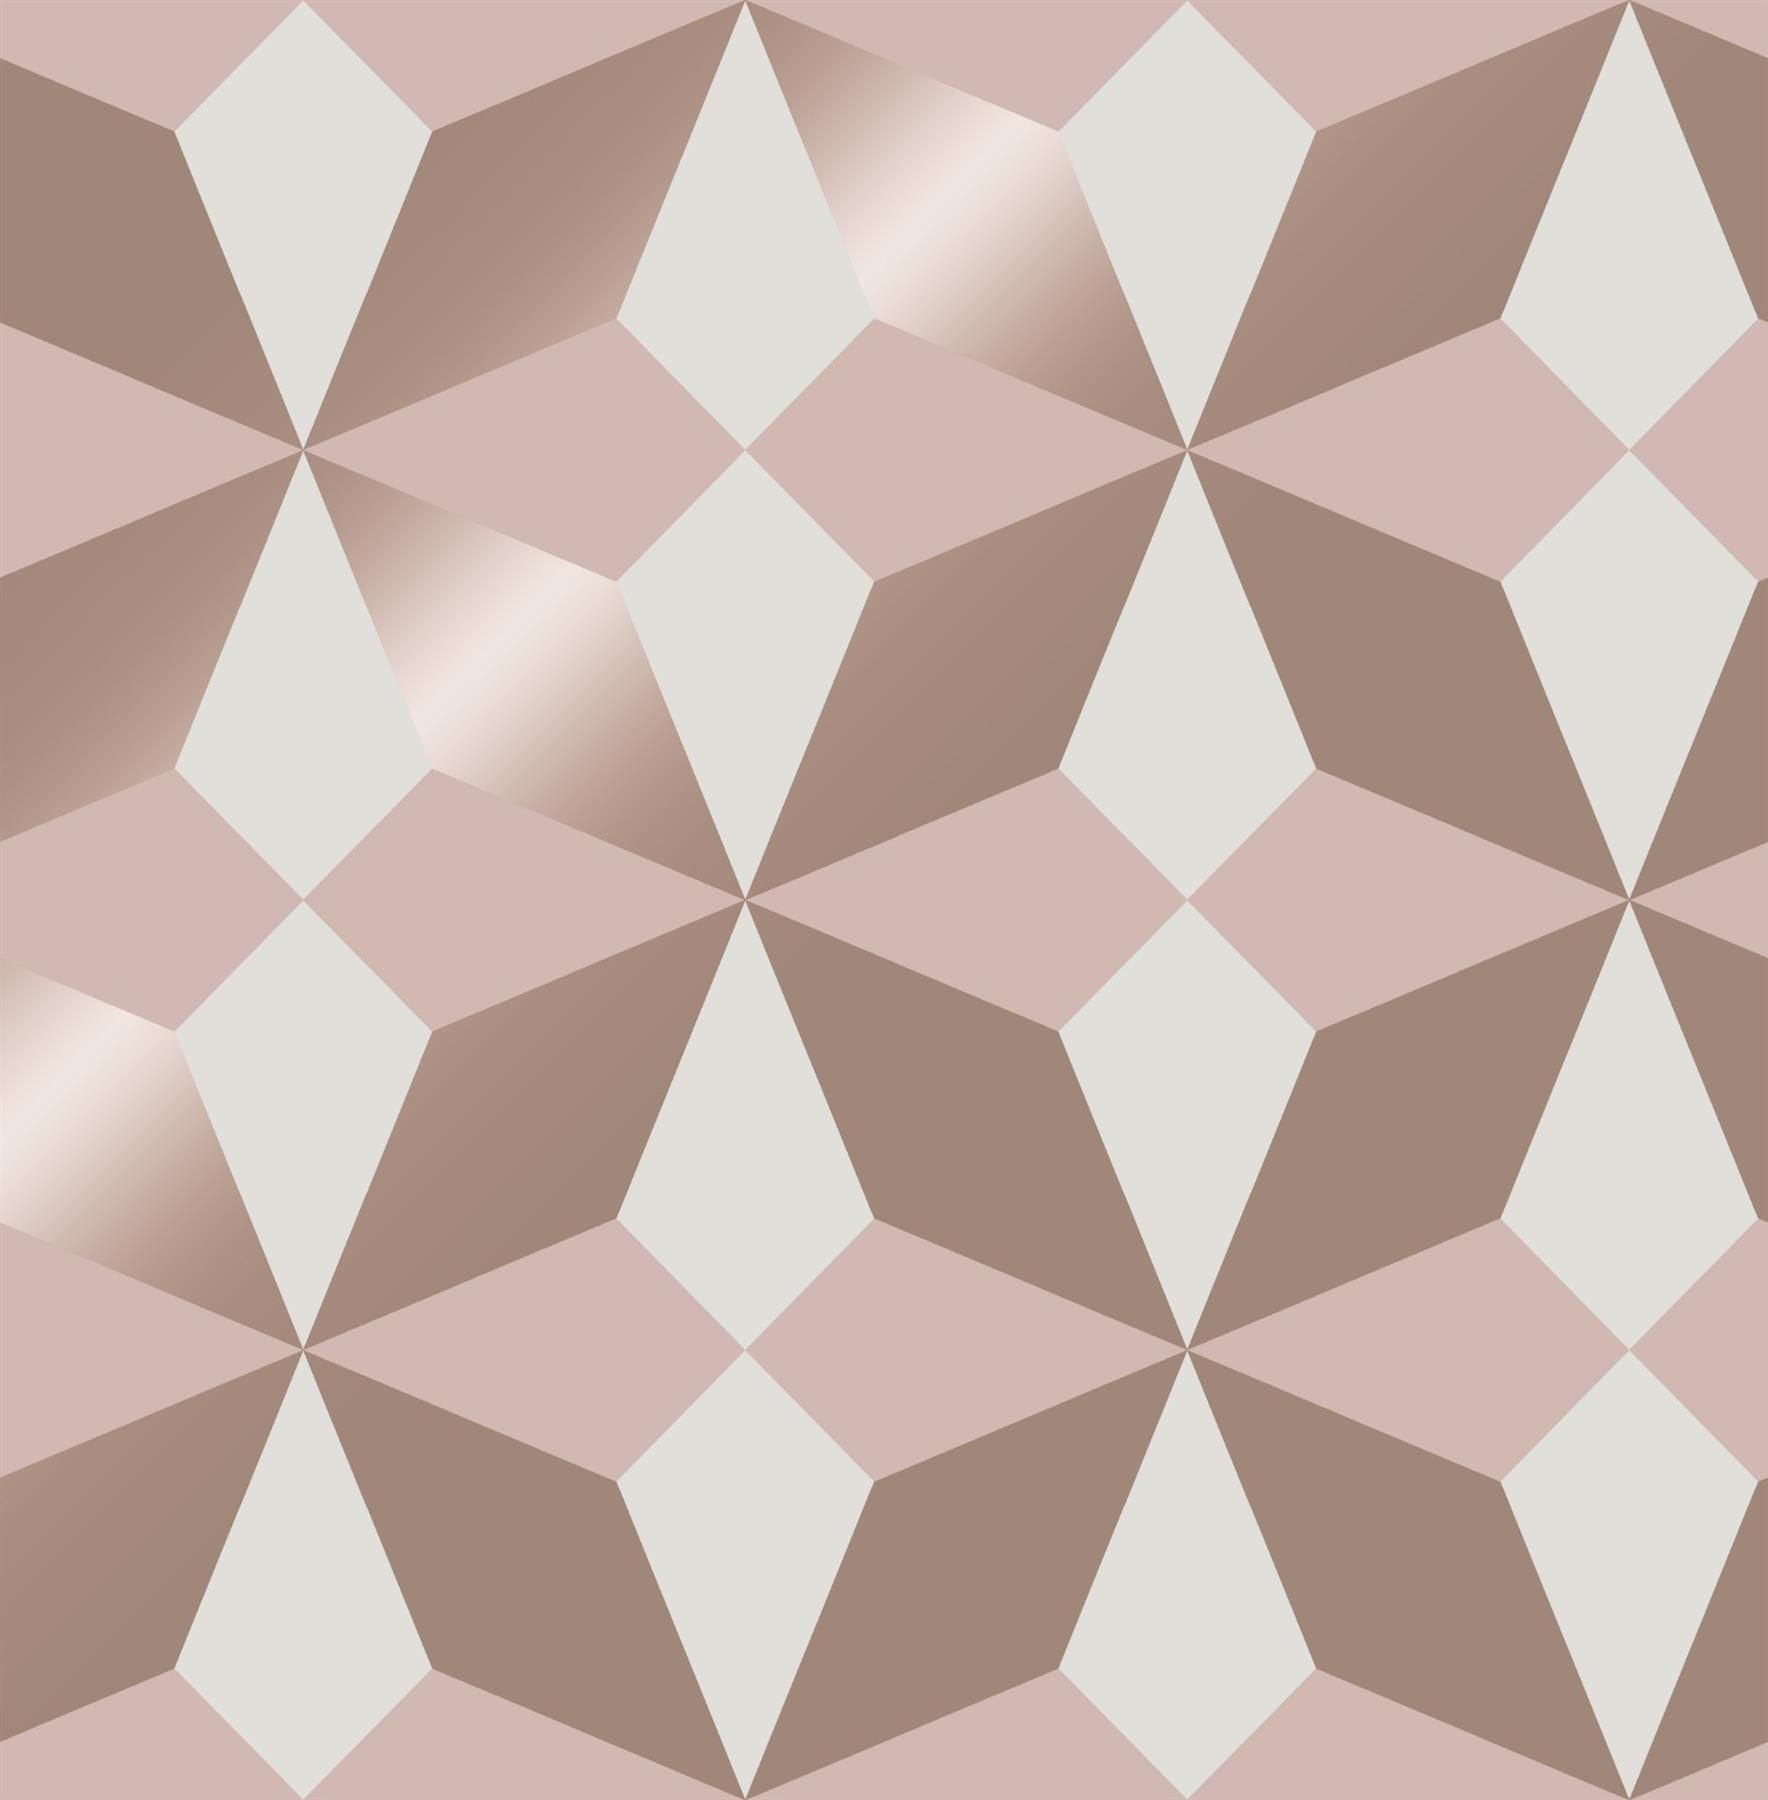 Red and White Geometric Wallpaper 1768x1800